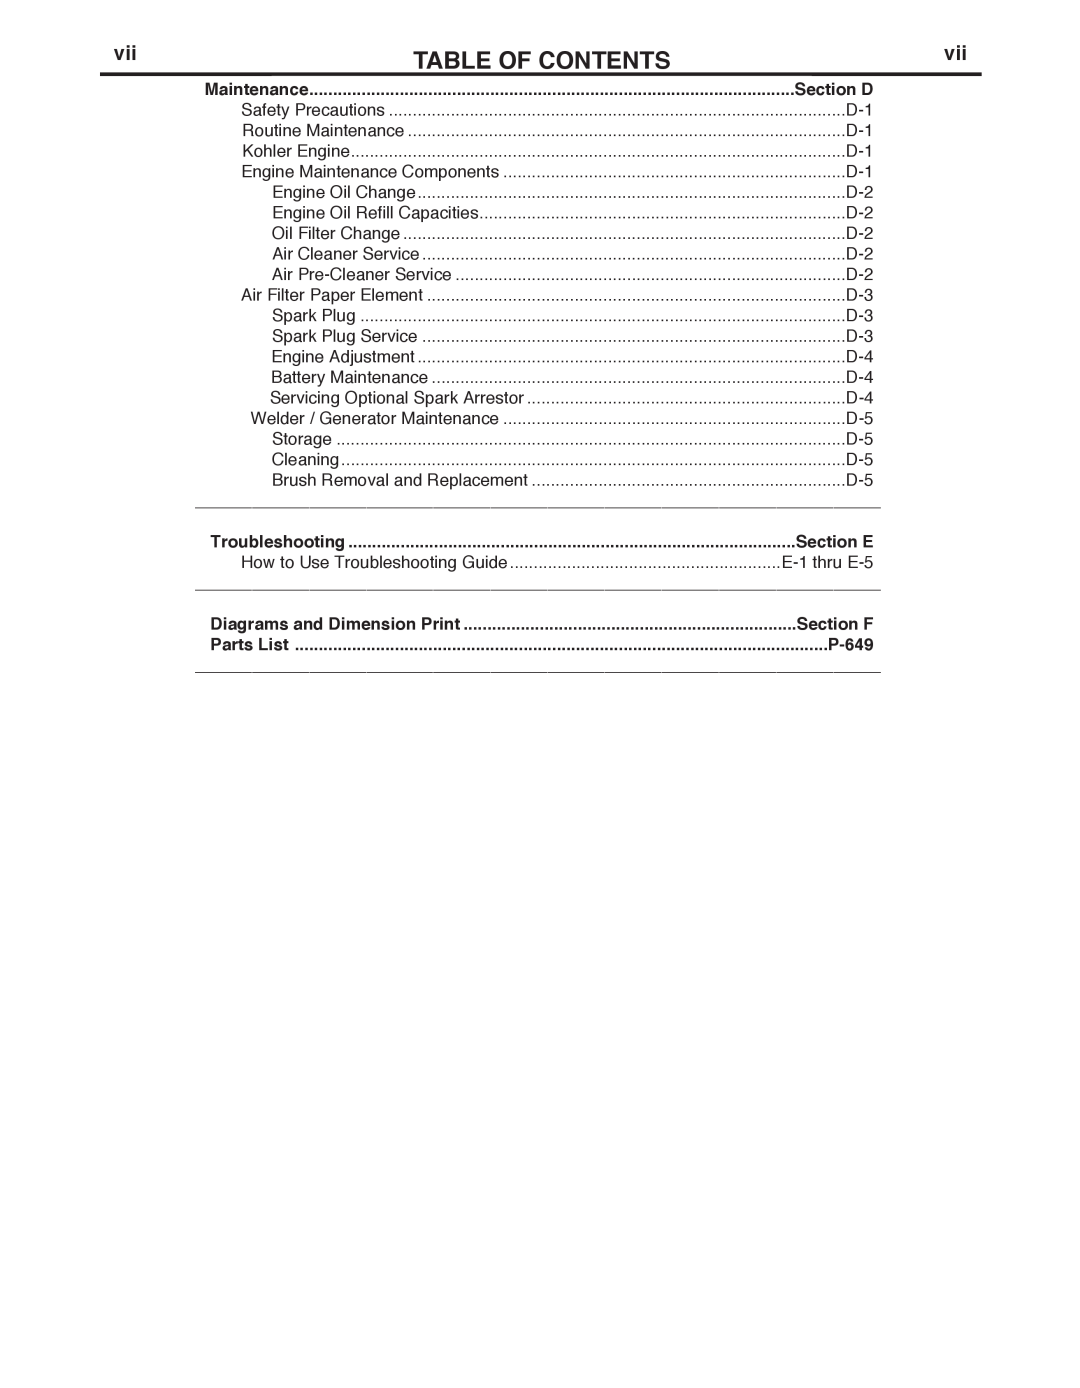 Lincoln Electric IM10043-A manual TAbLE OF CONTENTS, Section D, Section E, Section F, P-649 